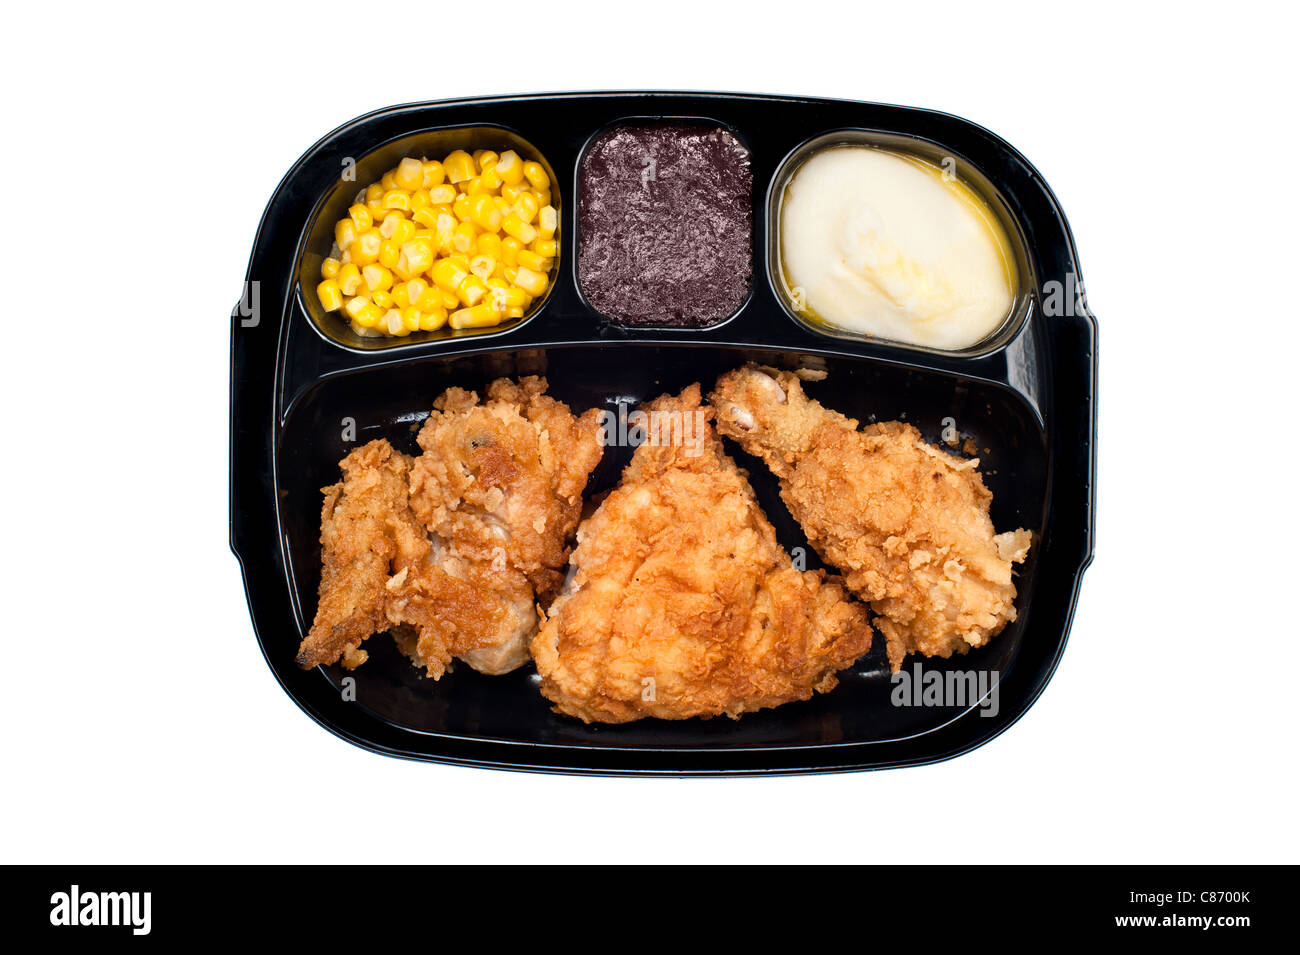 A cooked tv dinner of fried chicken, corn, mashed potatoes and dessert in a plastic black tray. Stock Photo